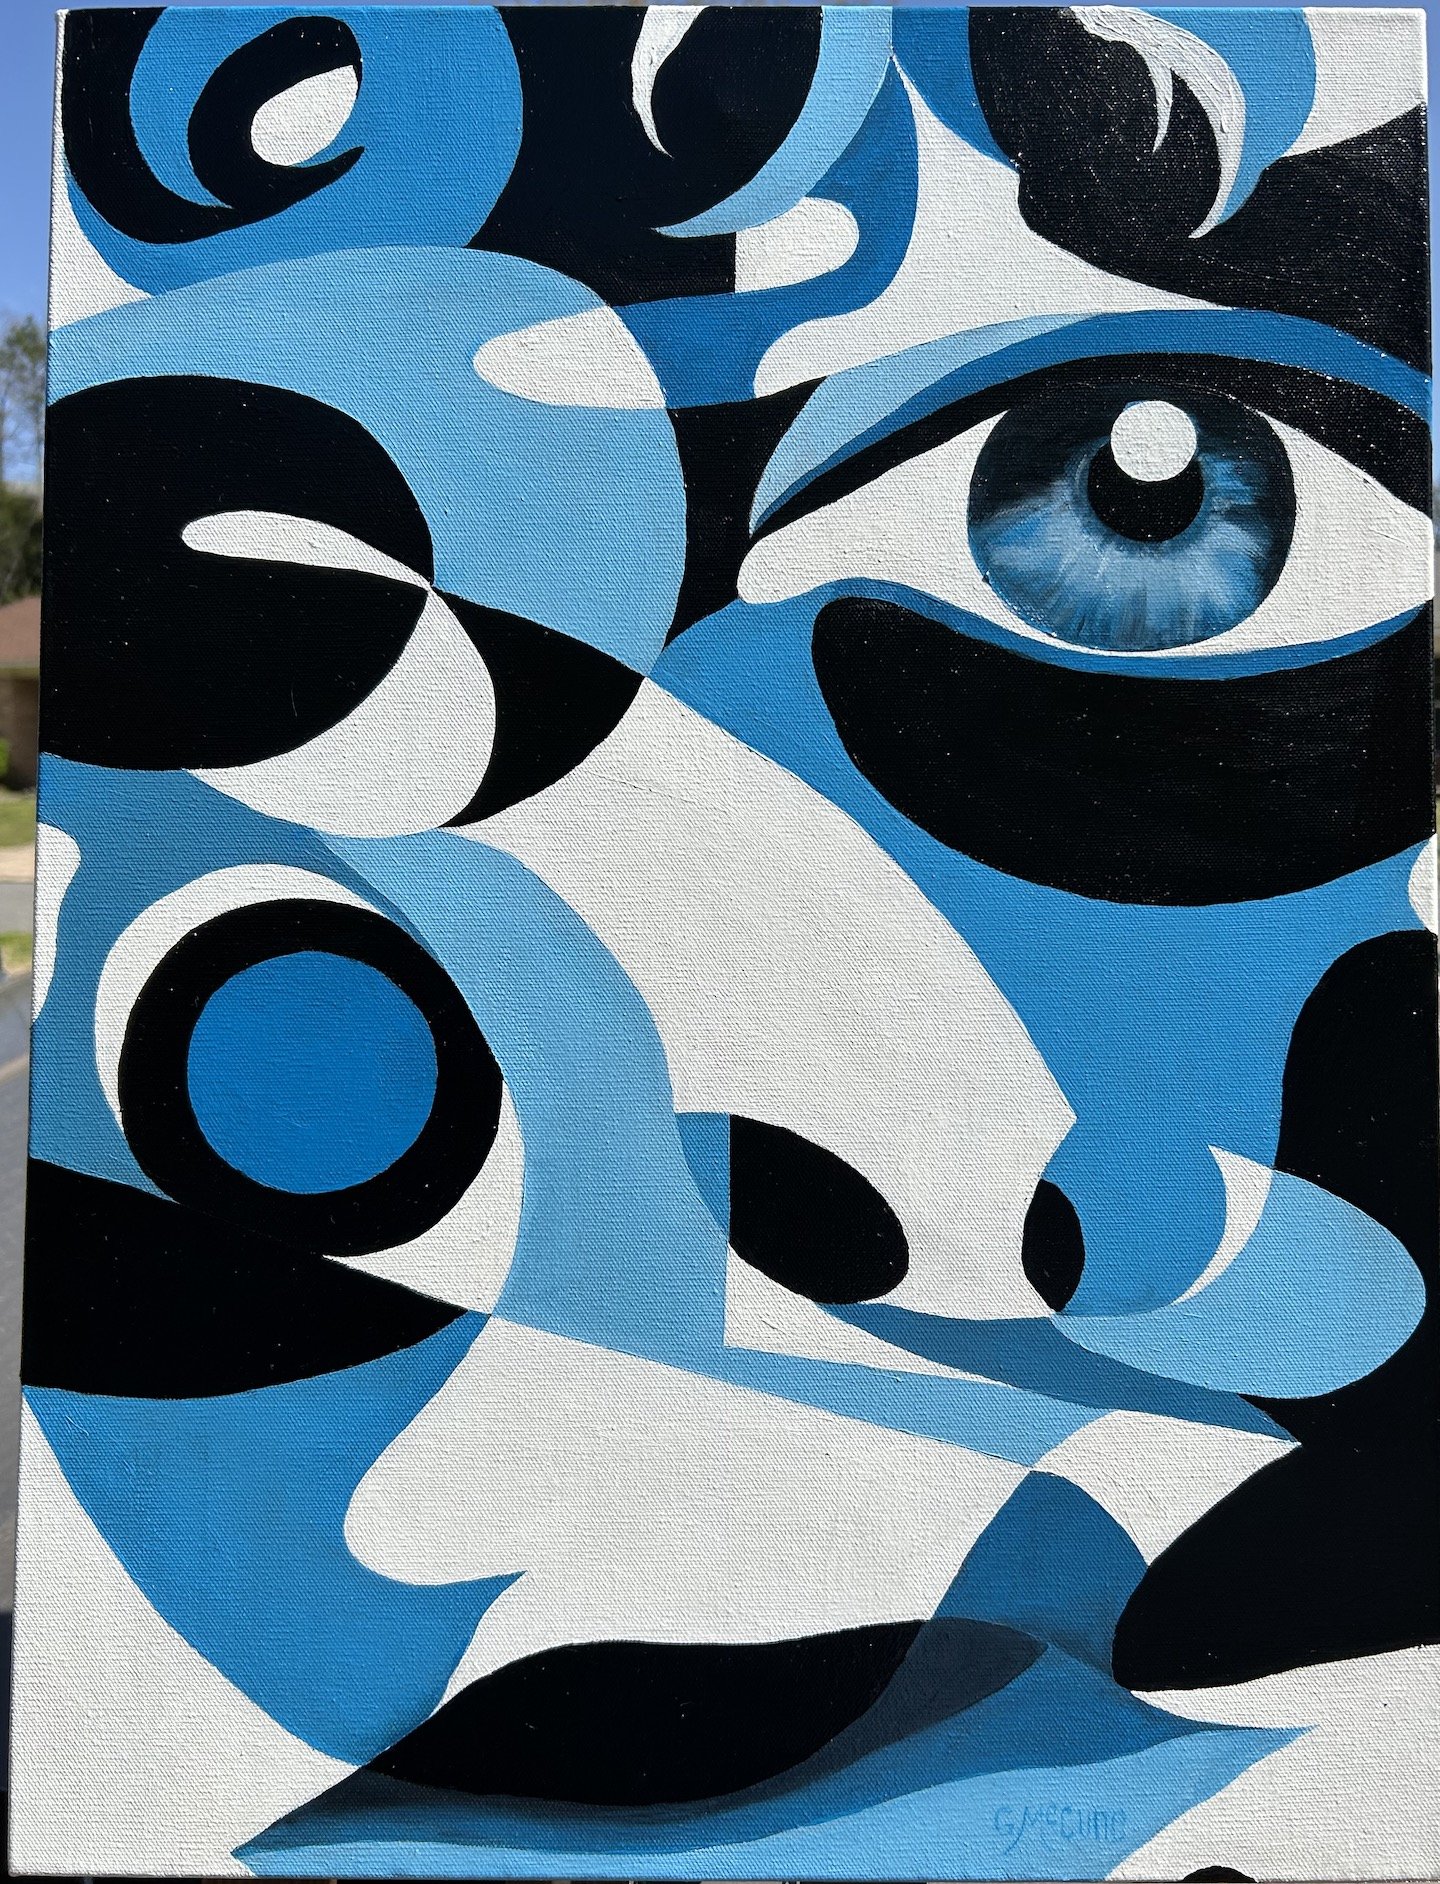    Blue Eyed Abstract  , 24” x 18”, oil on canvas 